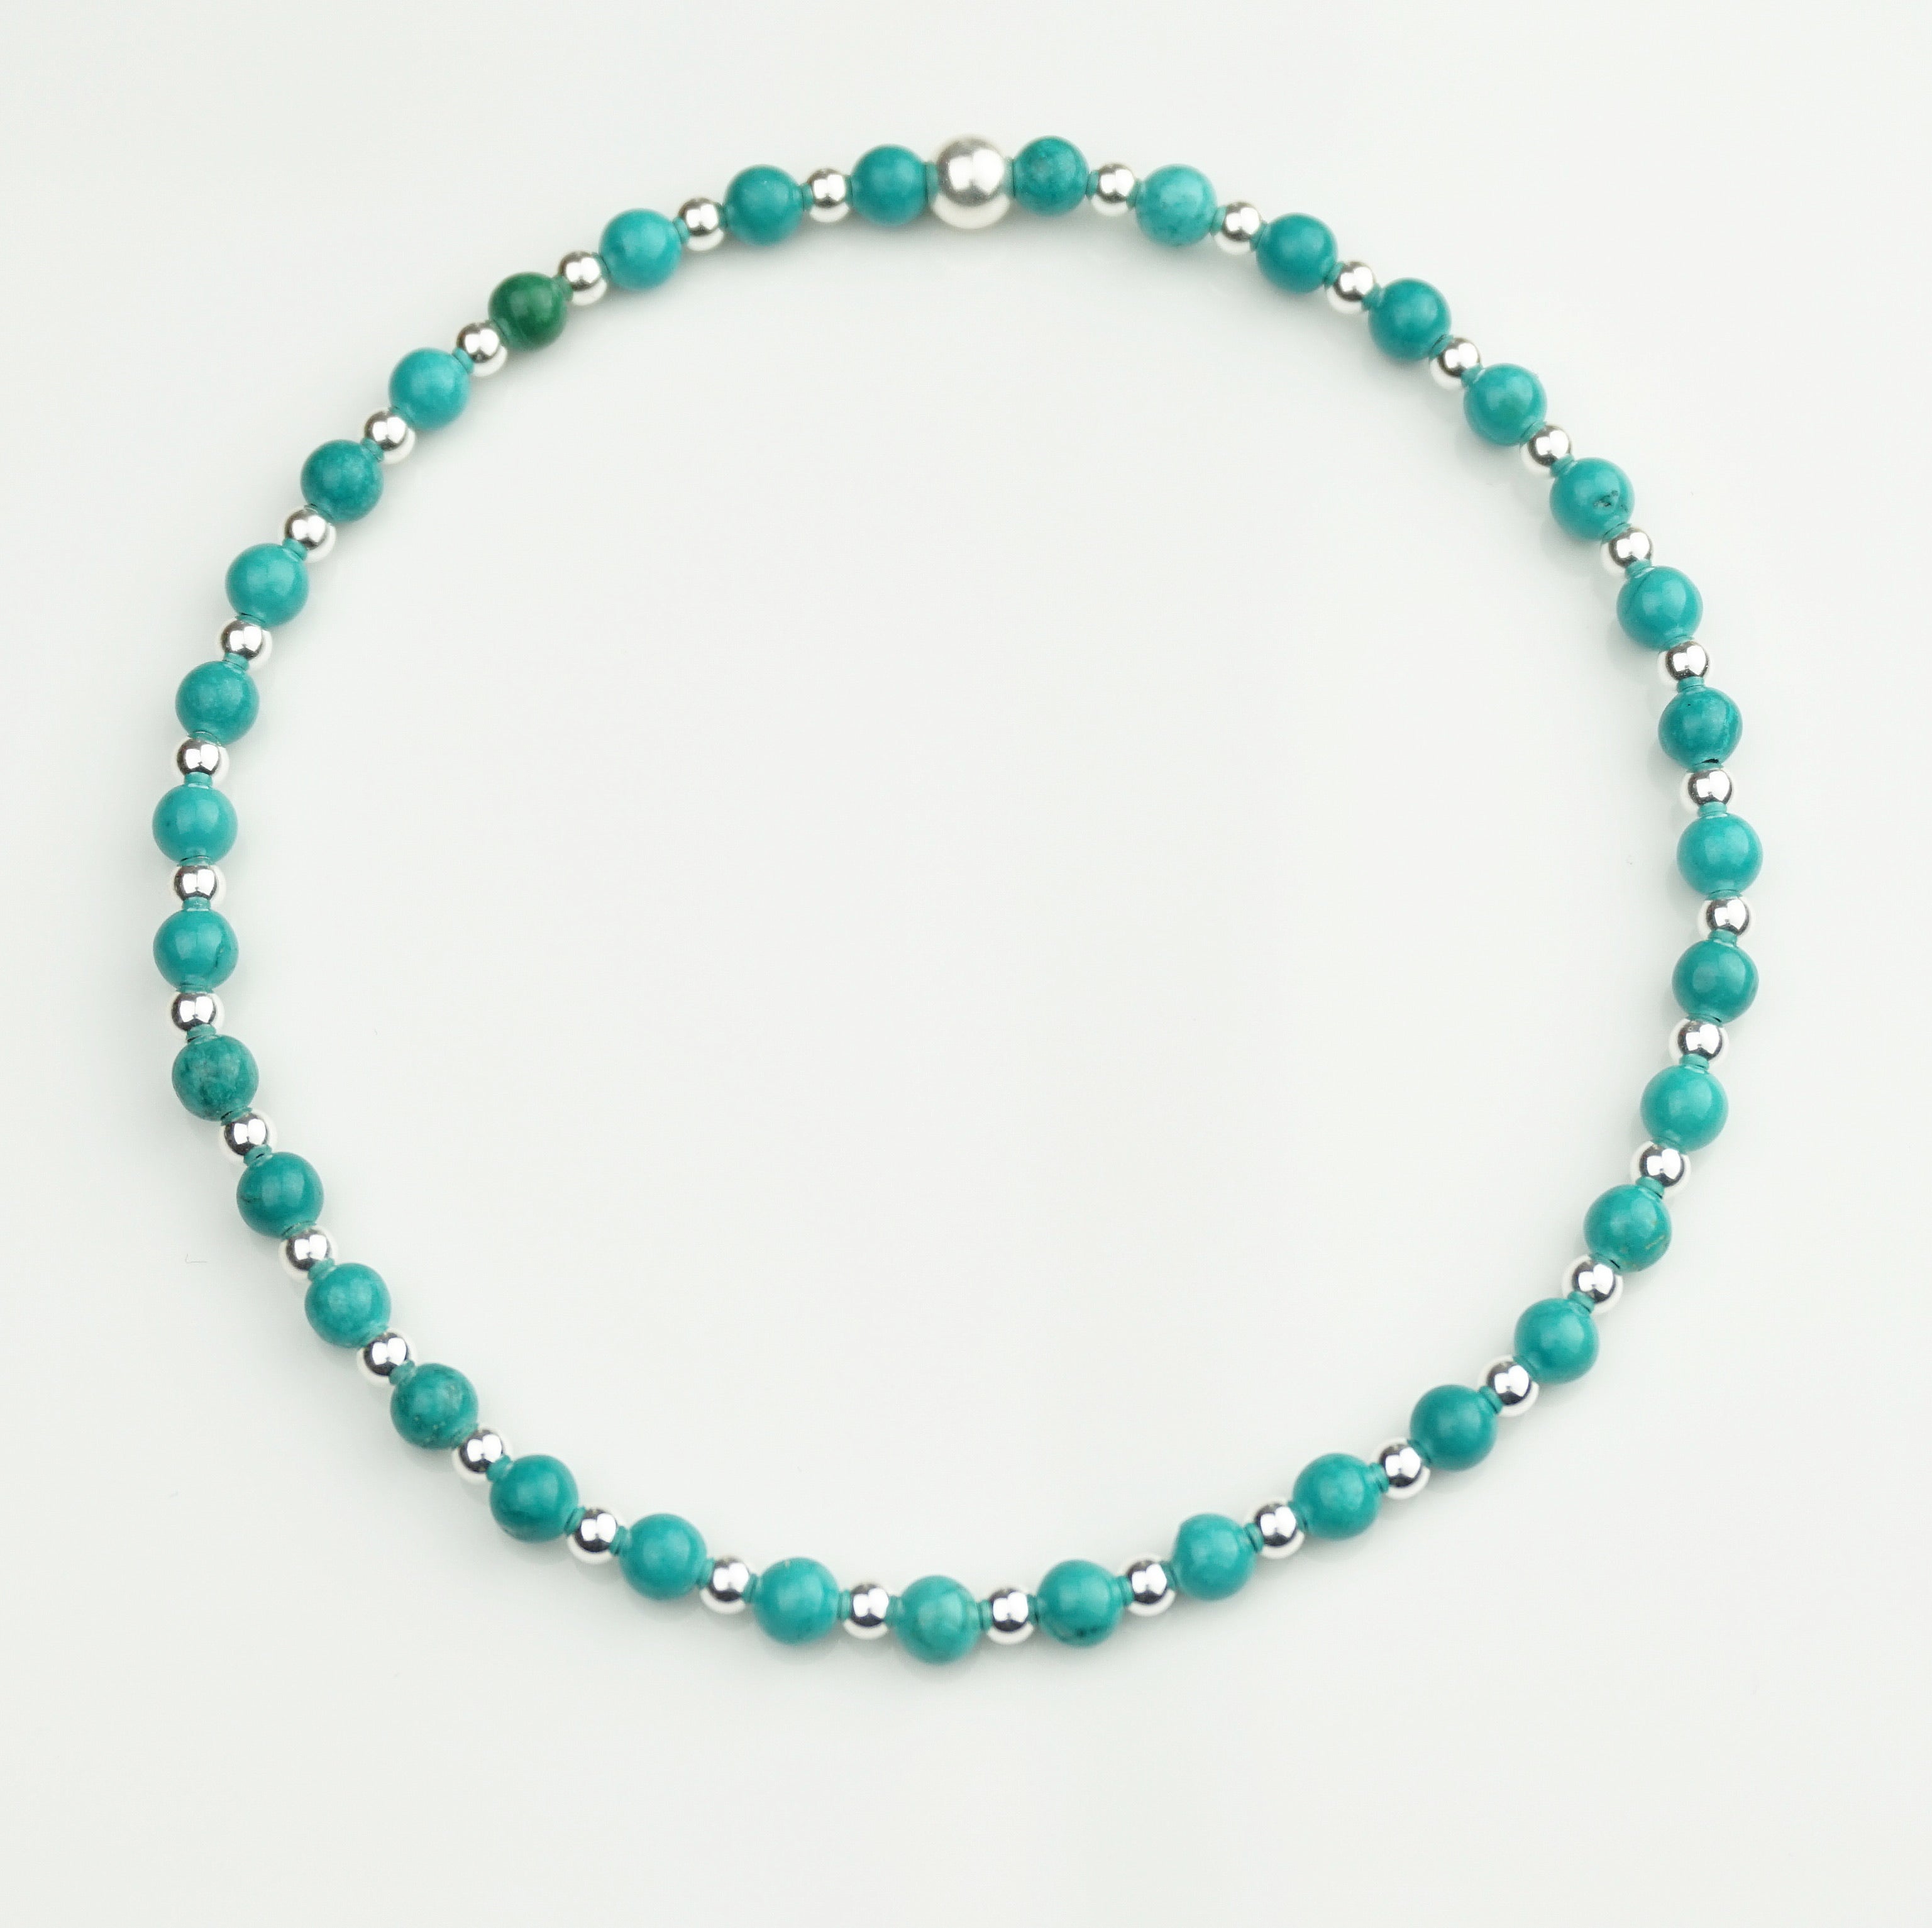 Anklet – Turquoise and Sterling Silver